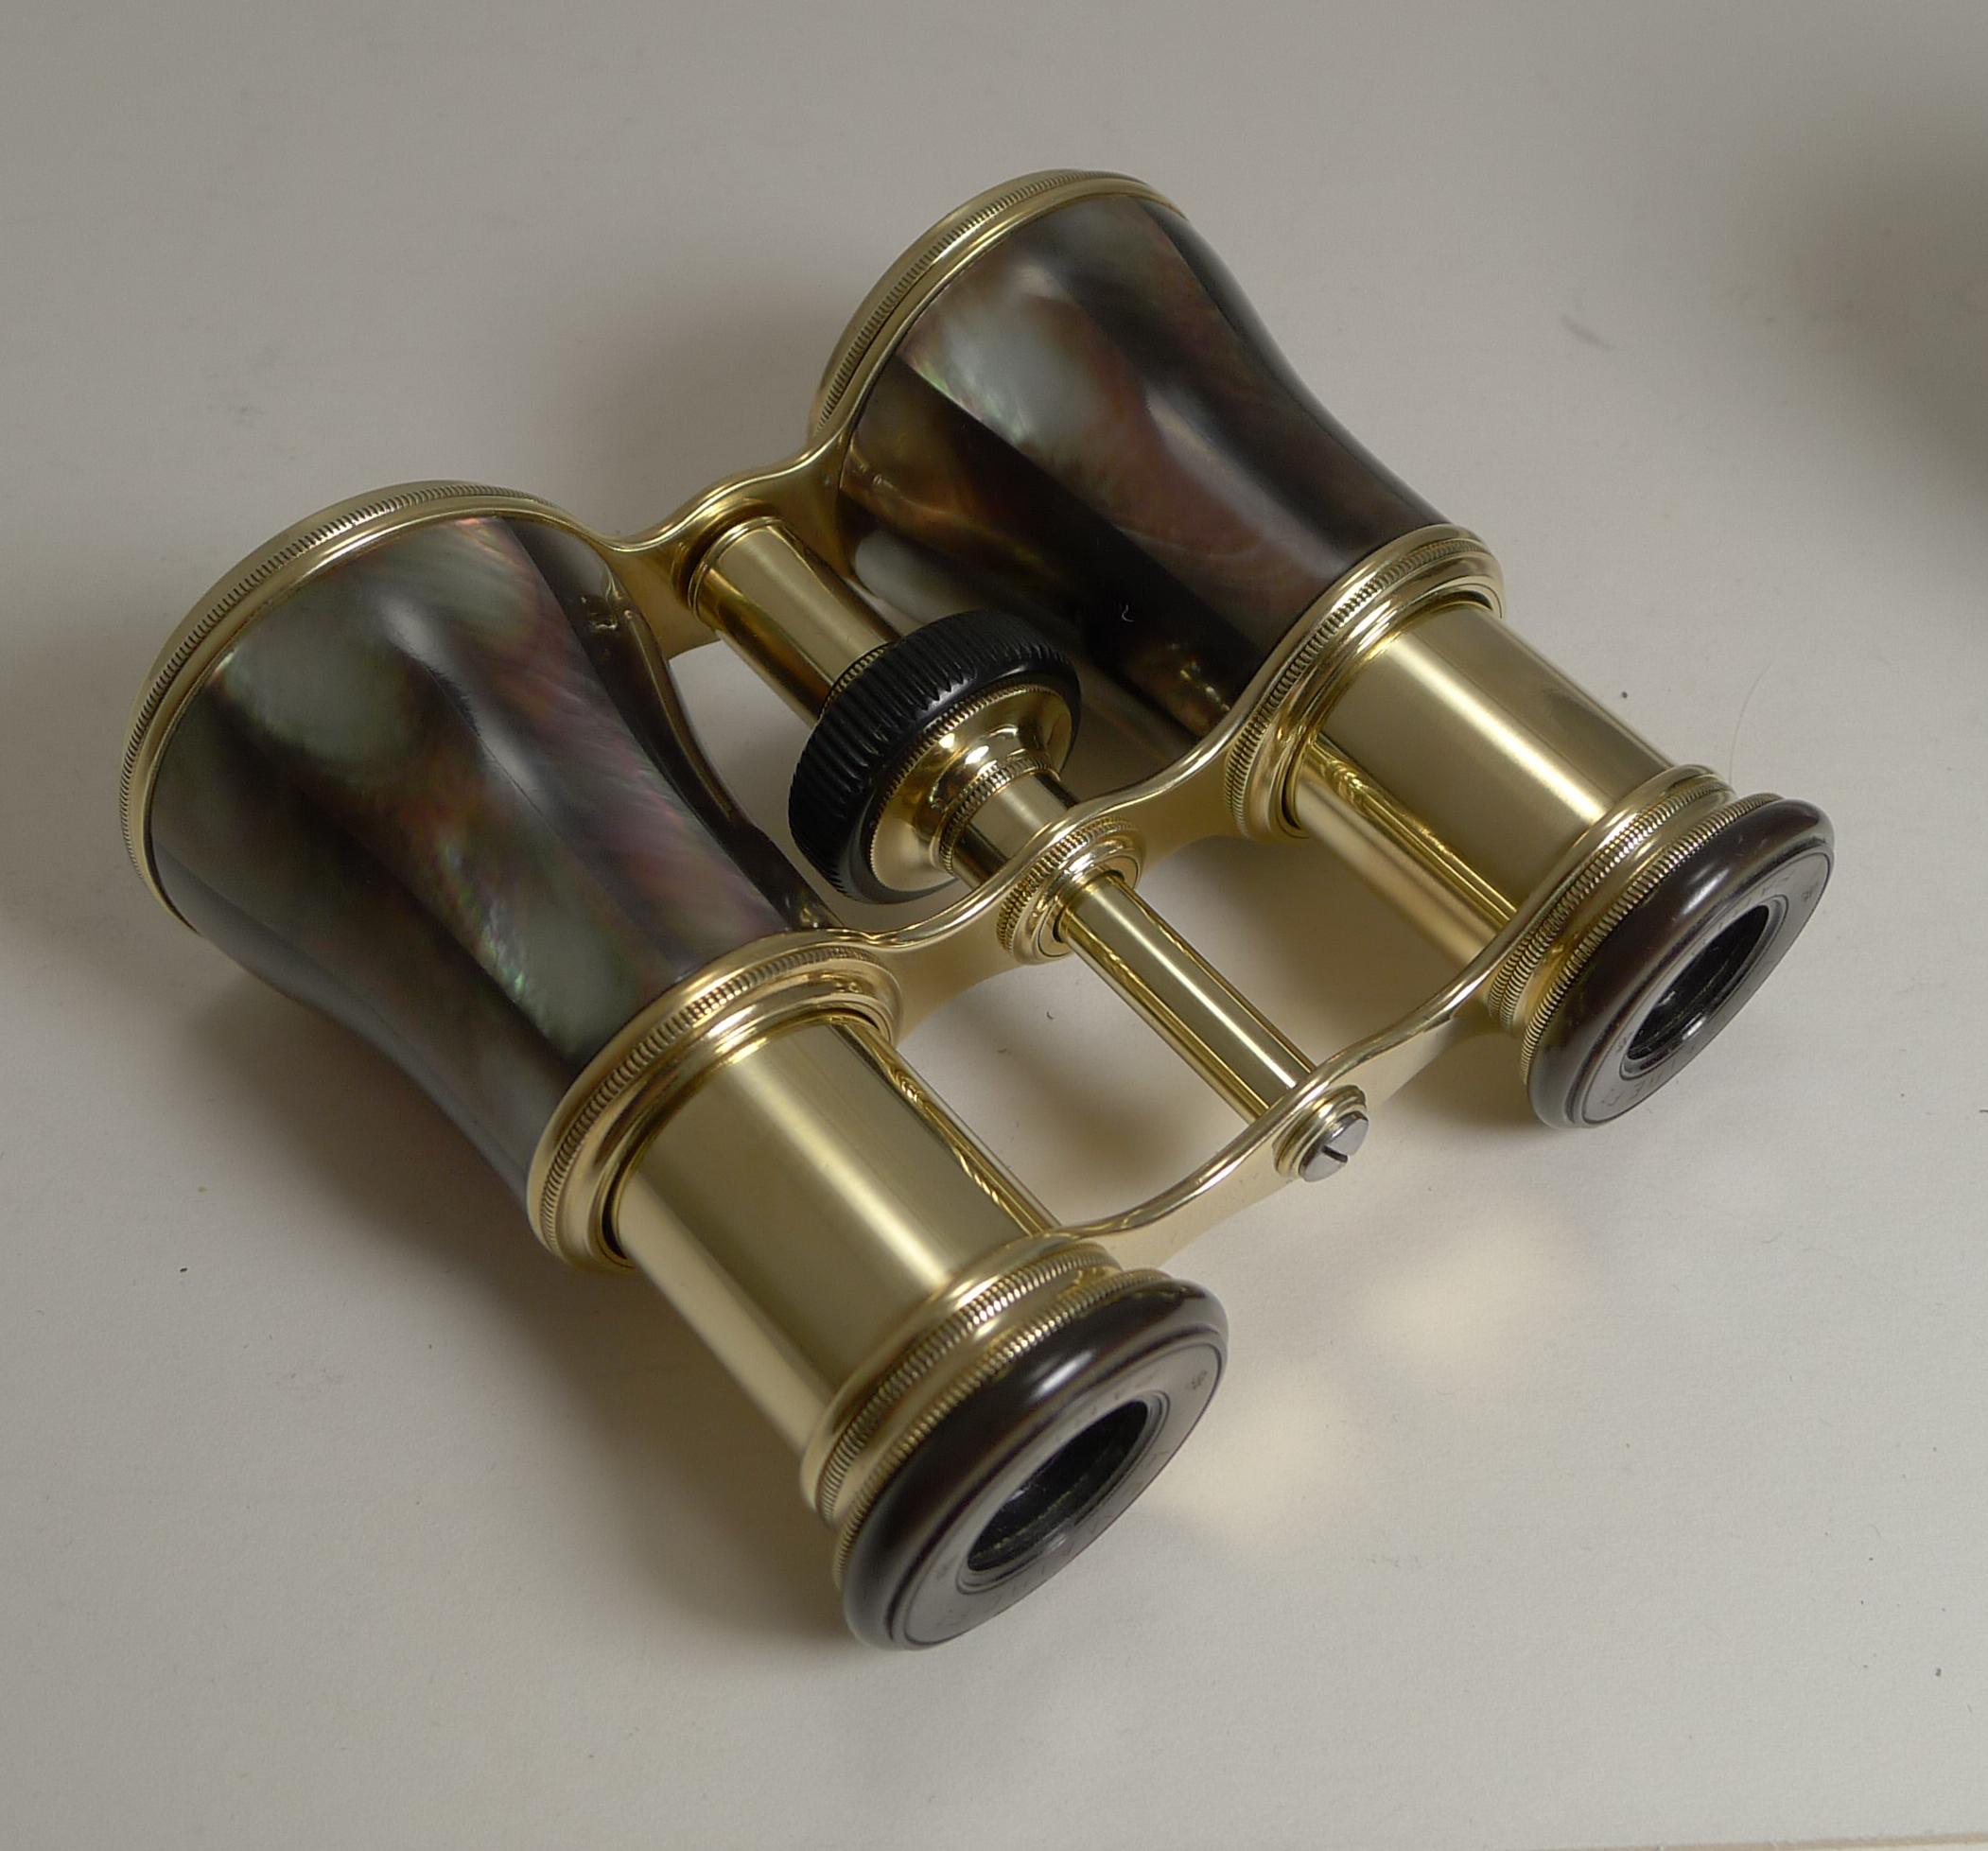 Abalone A truly exquisite pair of Opera Glasses by the top-notch maker, LeMaire of Paris